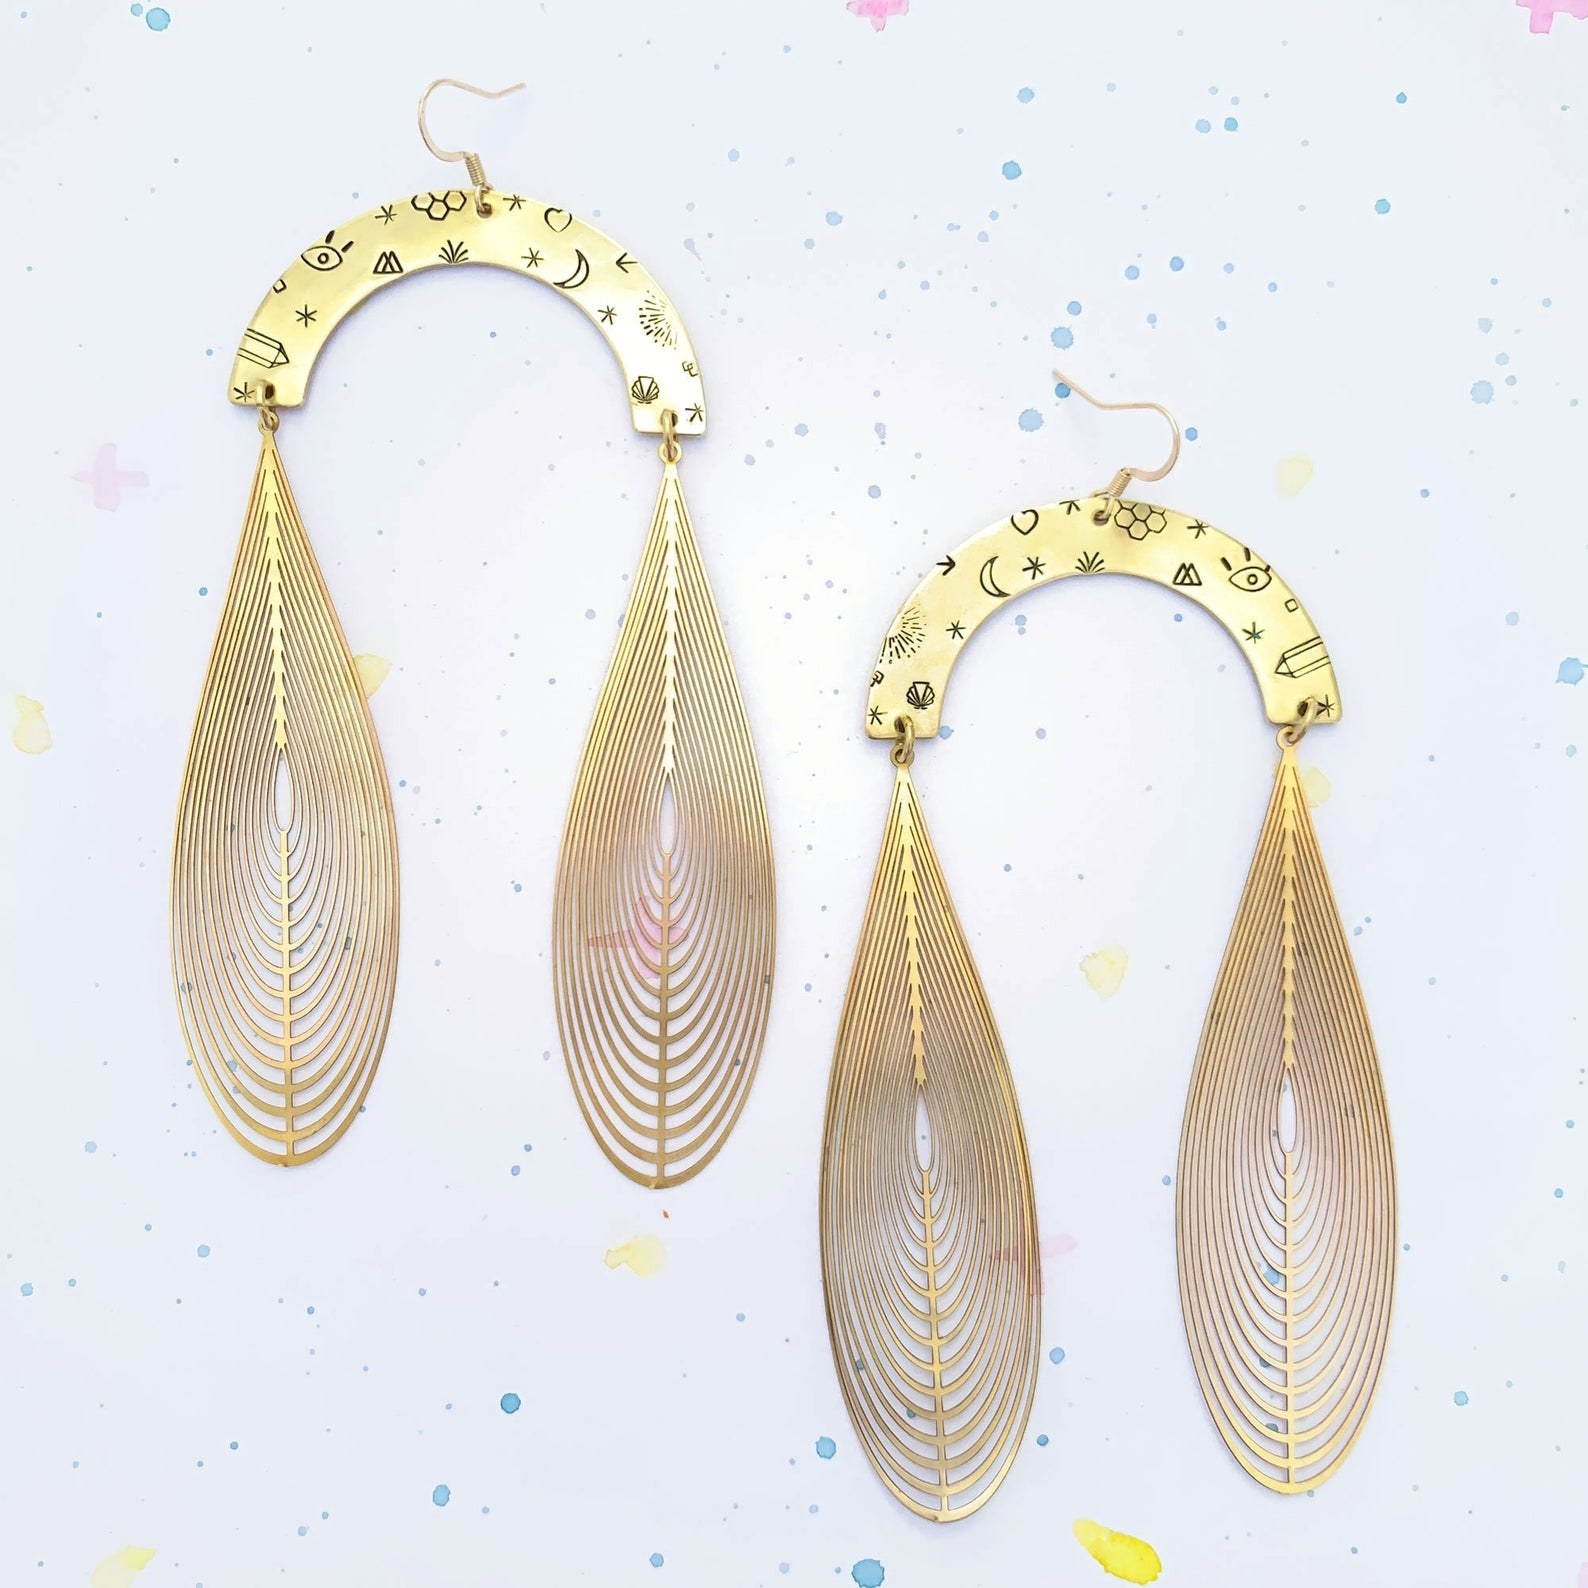 The earrings featuring an arch with a moon, eye, stars, and other symbols on it, with two gold  &quot;magic wings&quot; hanging from the arches 